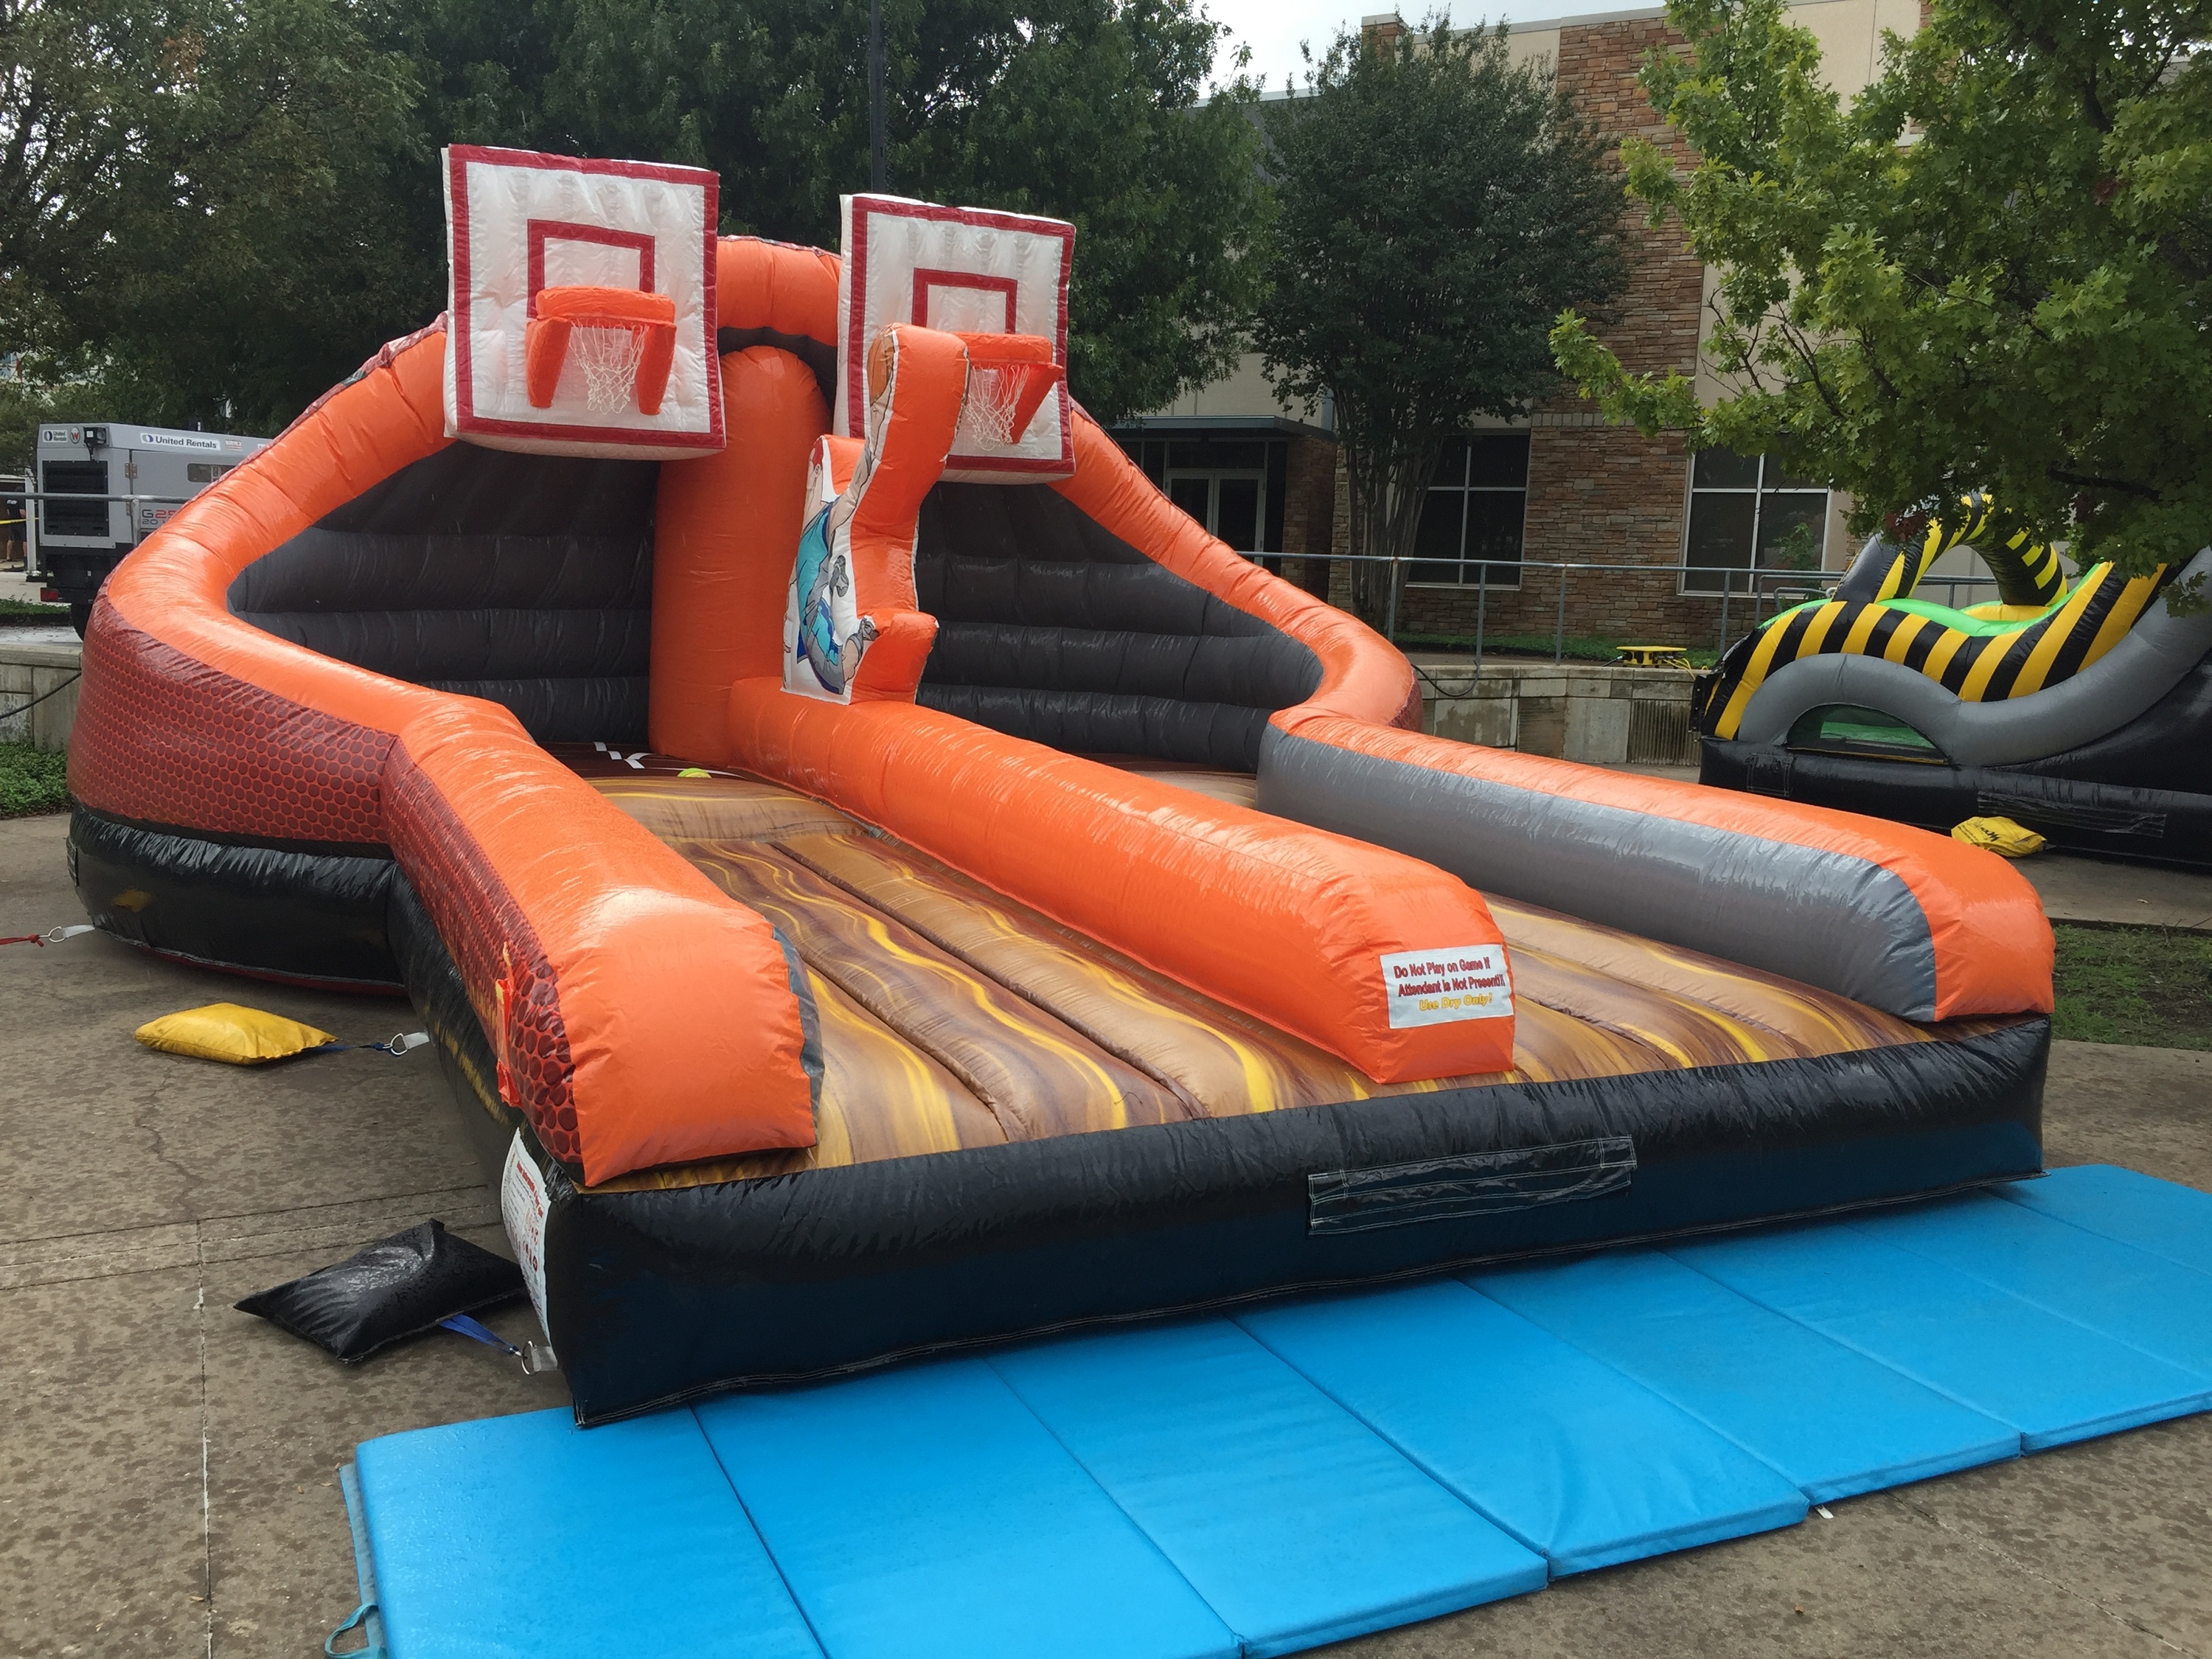 bounce house party rentals